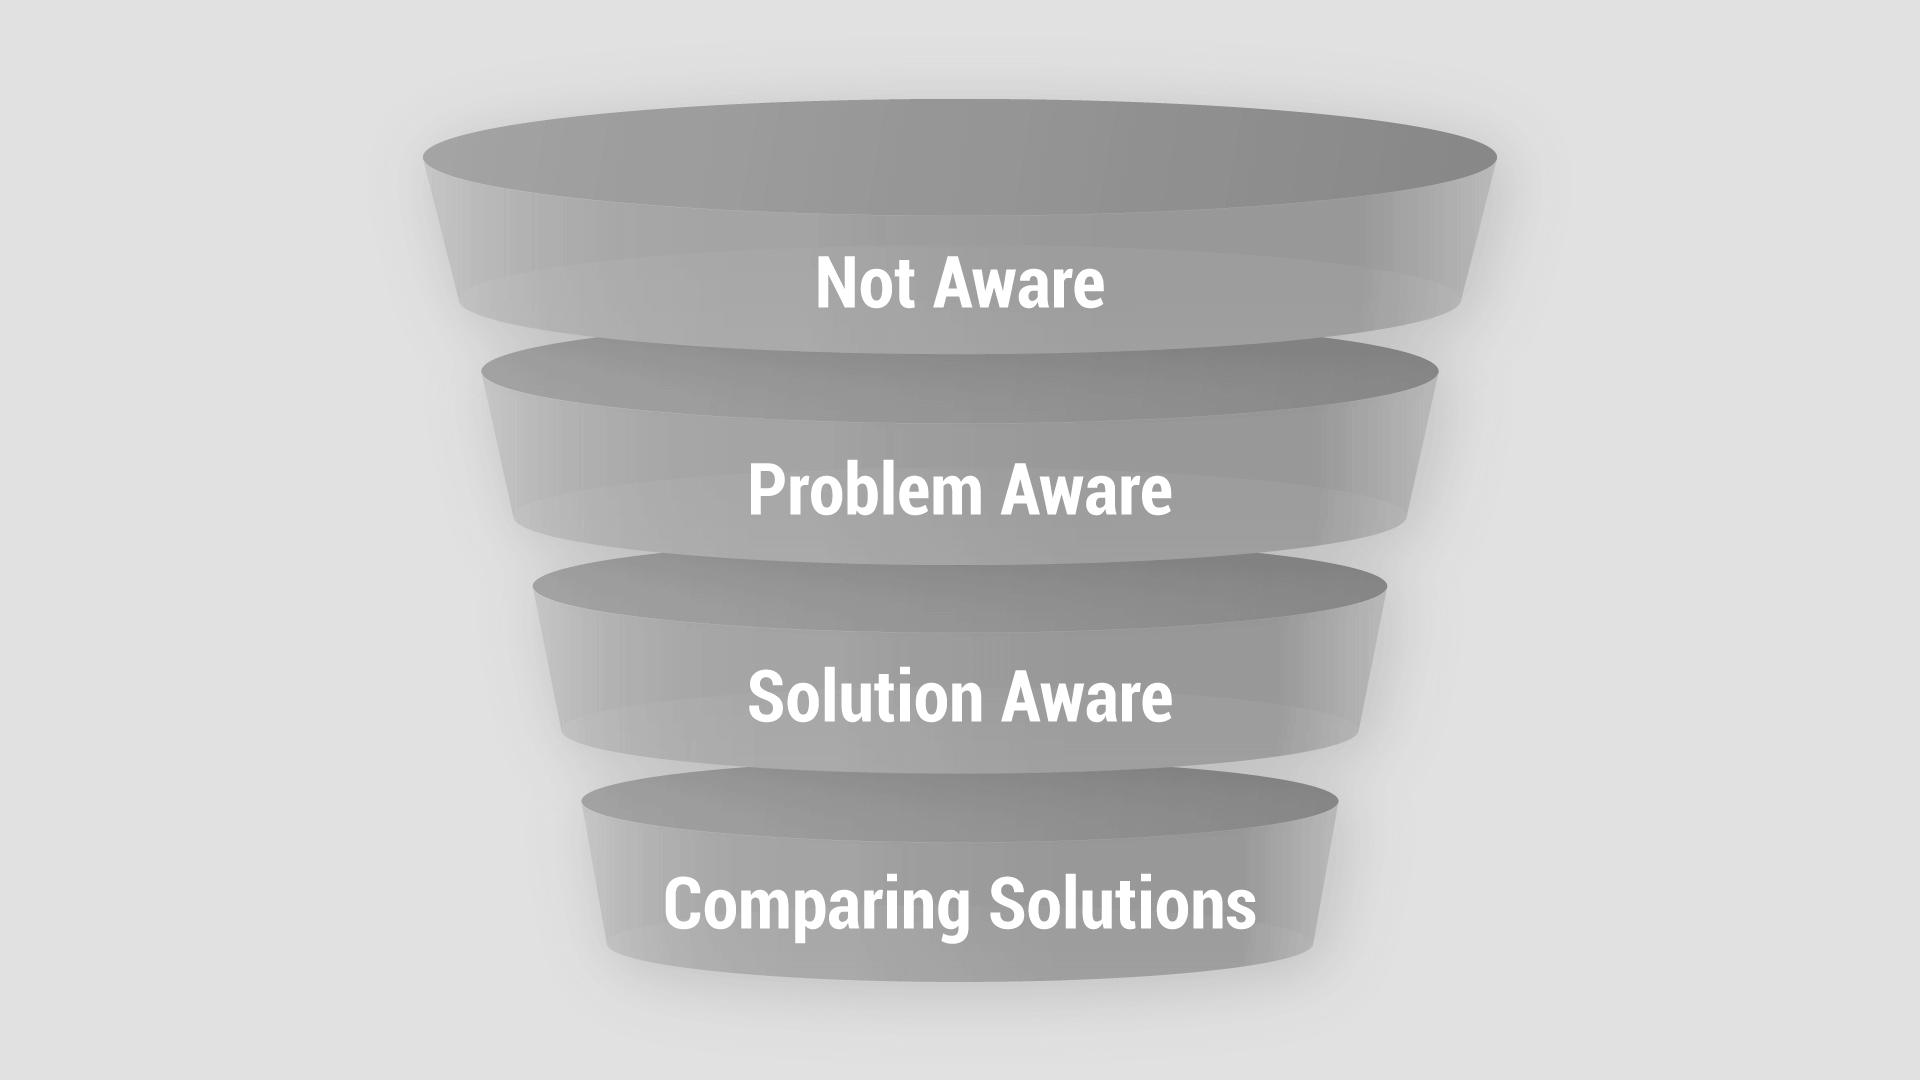 1. Not aware.
2. Problem aware.
3. Solution aware.
4. Comparing solutions.